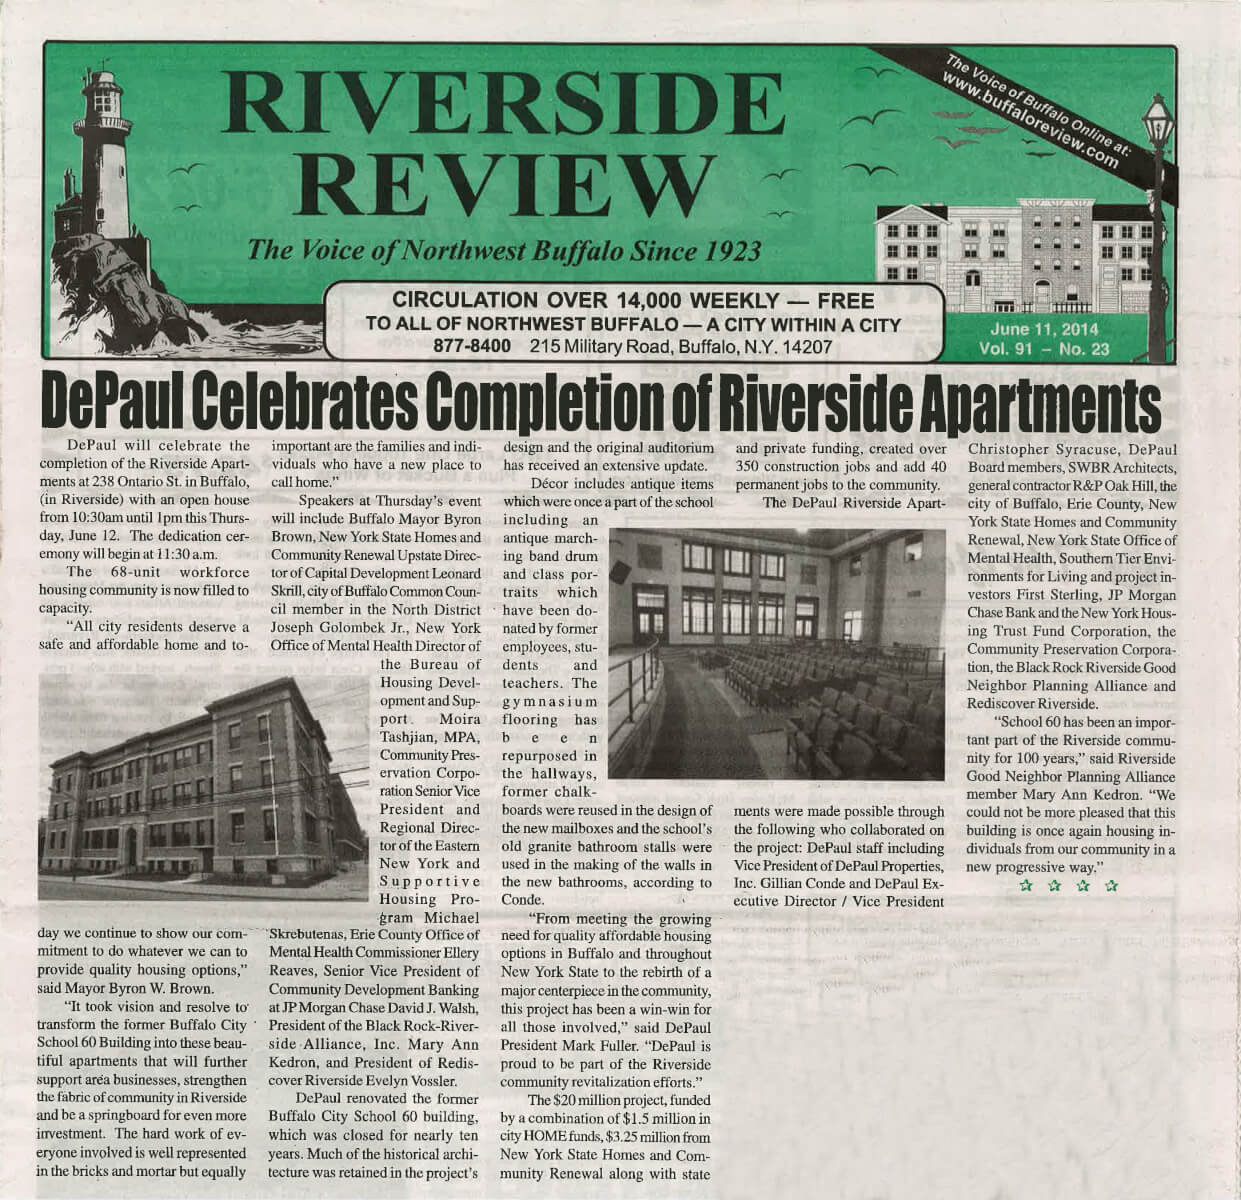 DePaul celebrates Completion of Riverside Apartments Article in the Riverside Review June 11, 2014